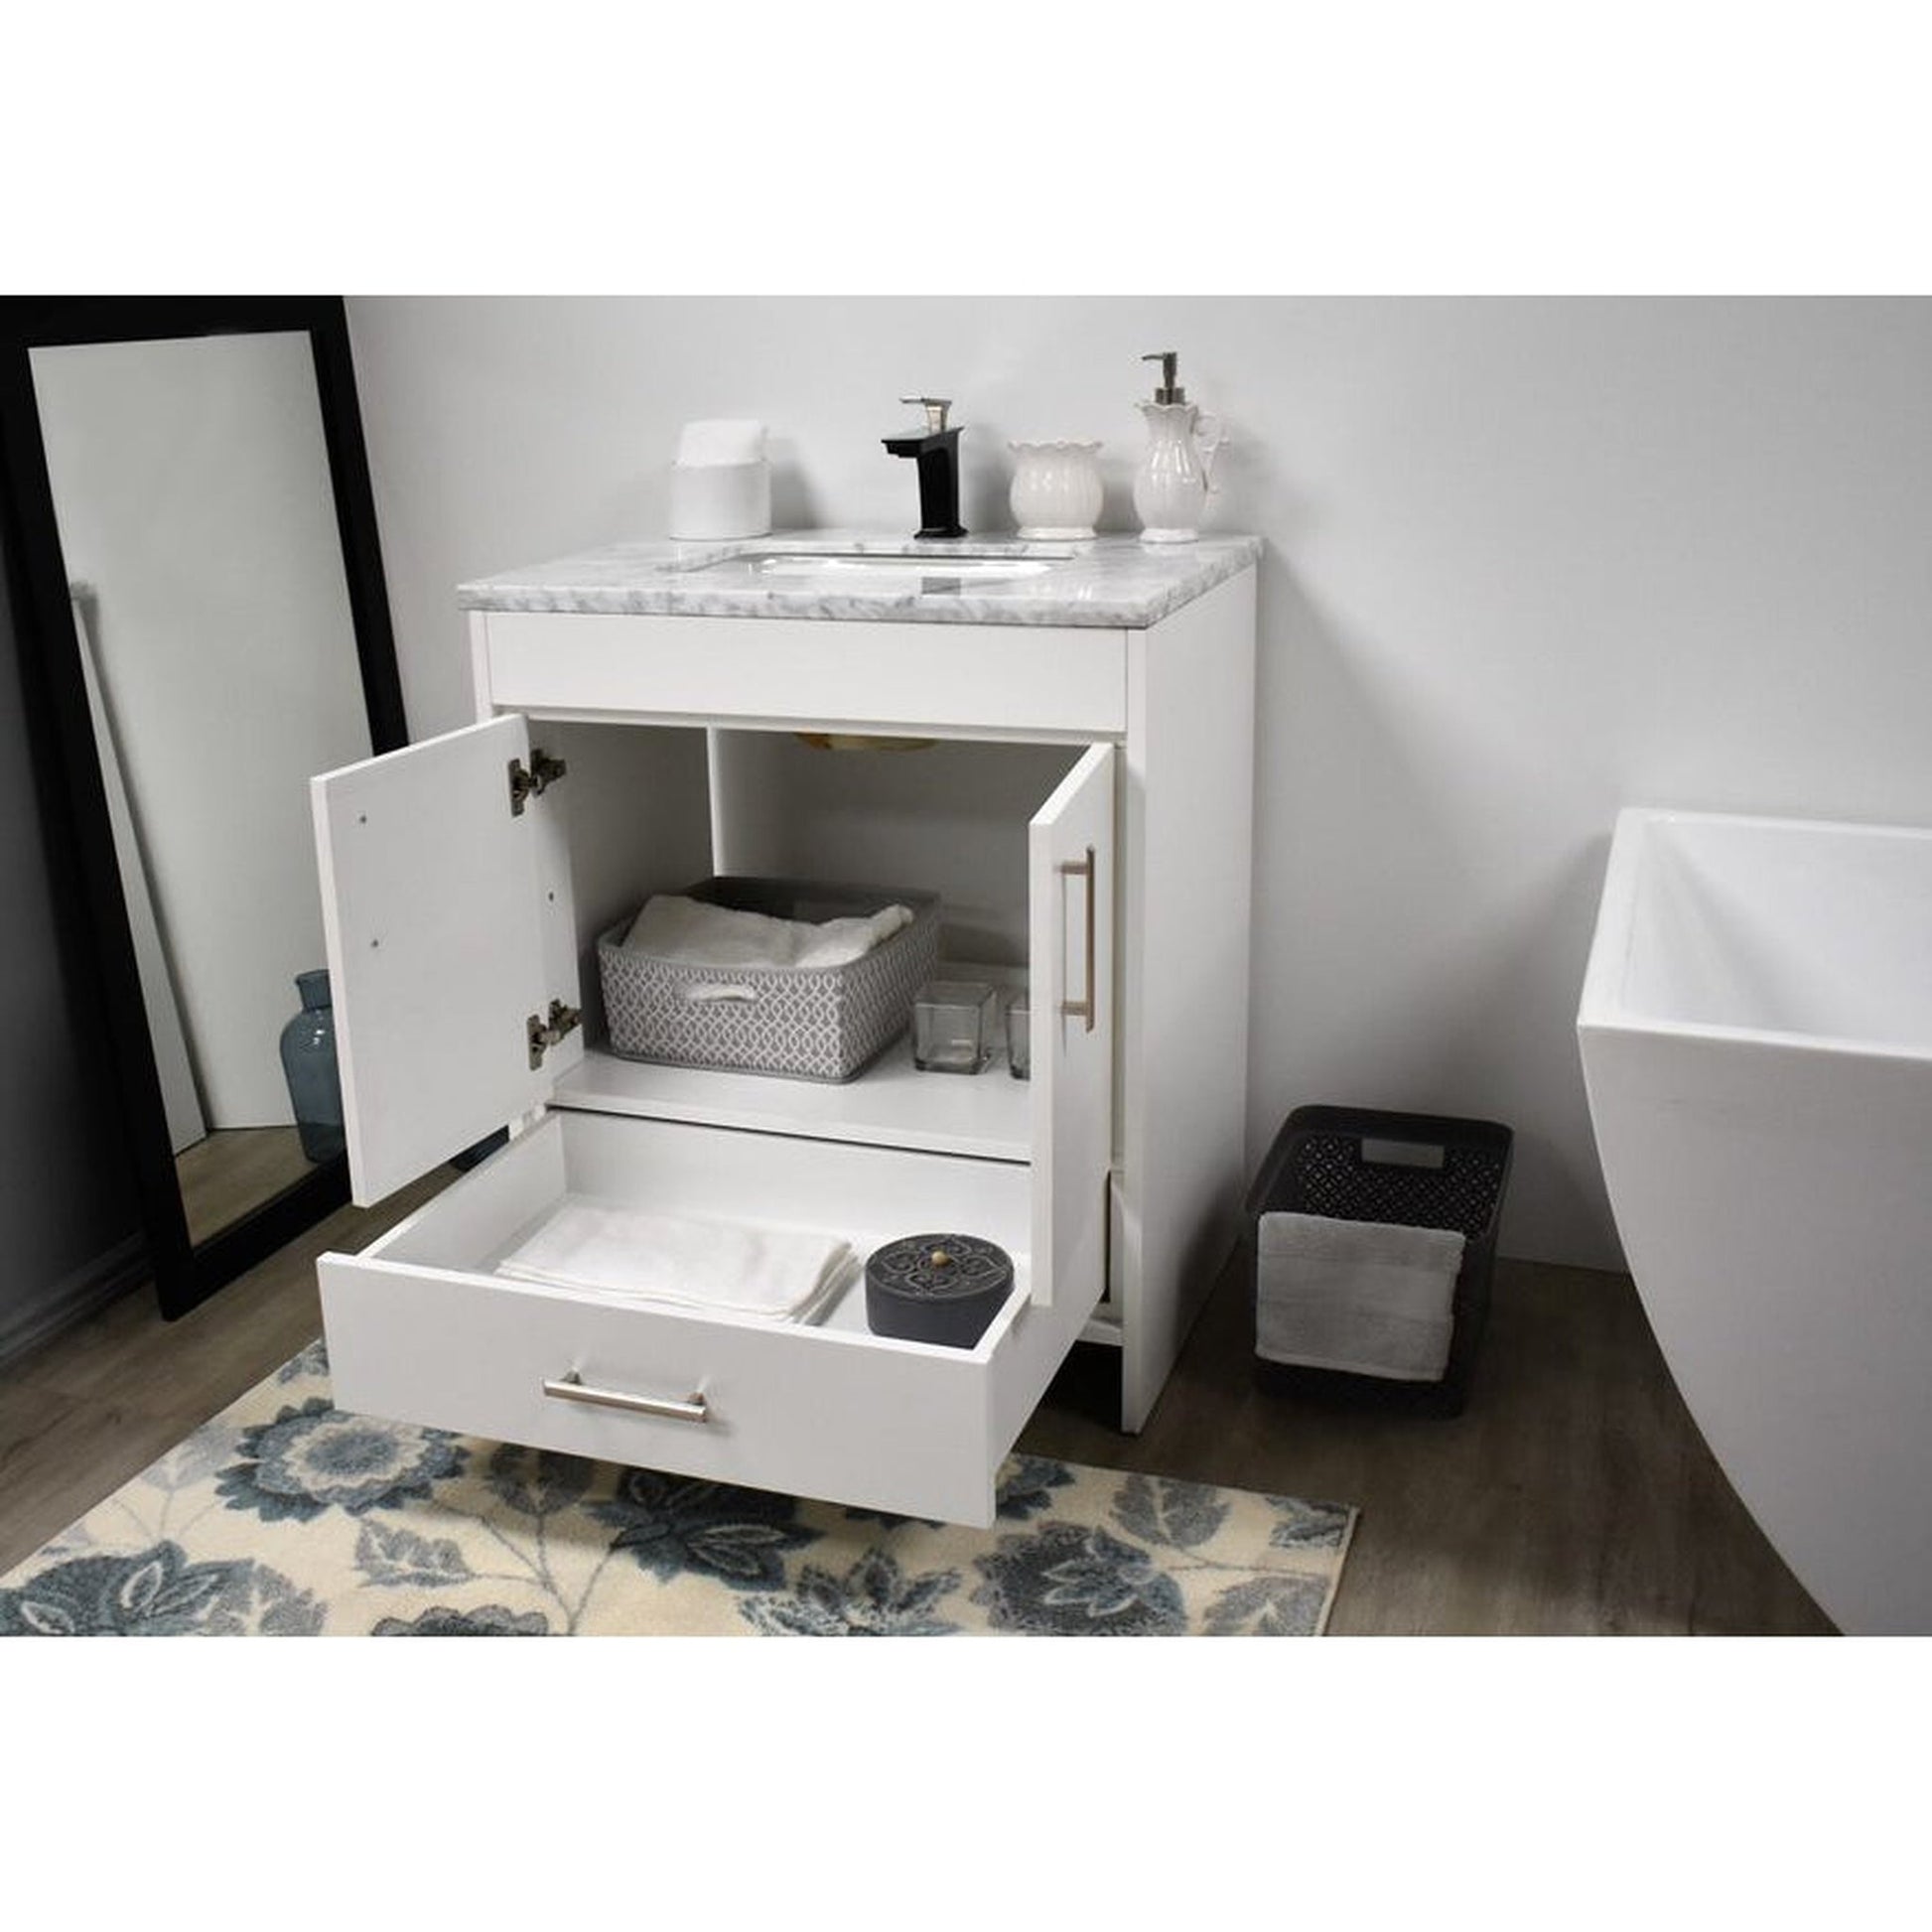 Volpa USA Capri 30" x 22" White Freestanding Modern Bathroom Vanity With Preinstalled Undermount Sink And Carrara Marble top With Brushed Nickel Edge Handles